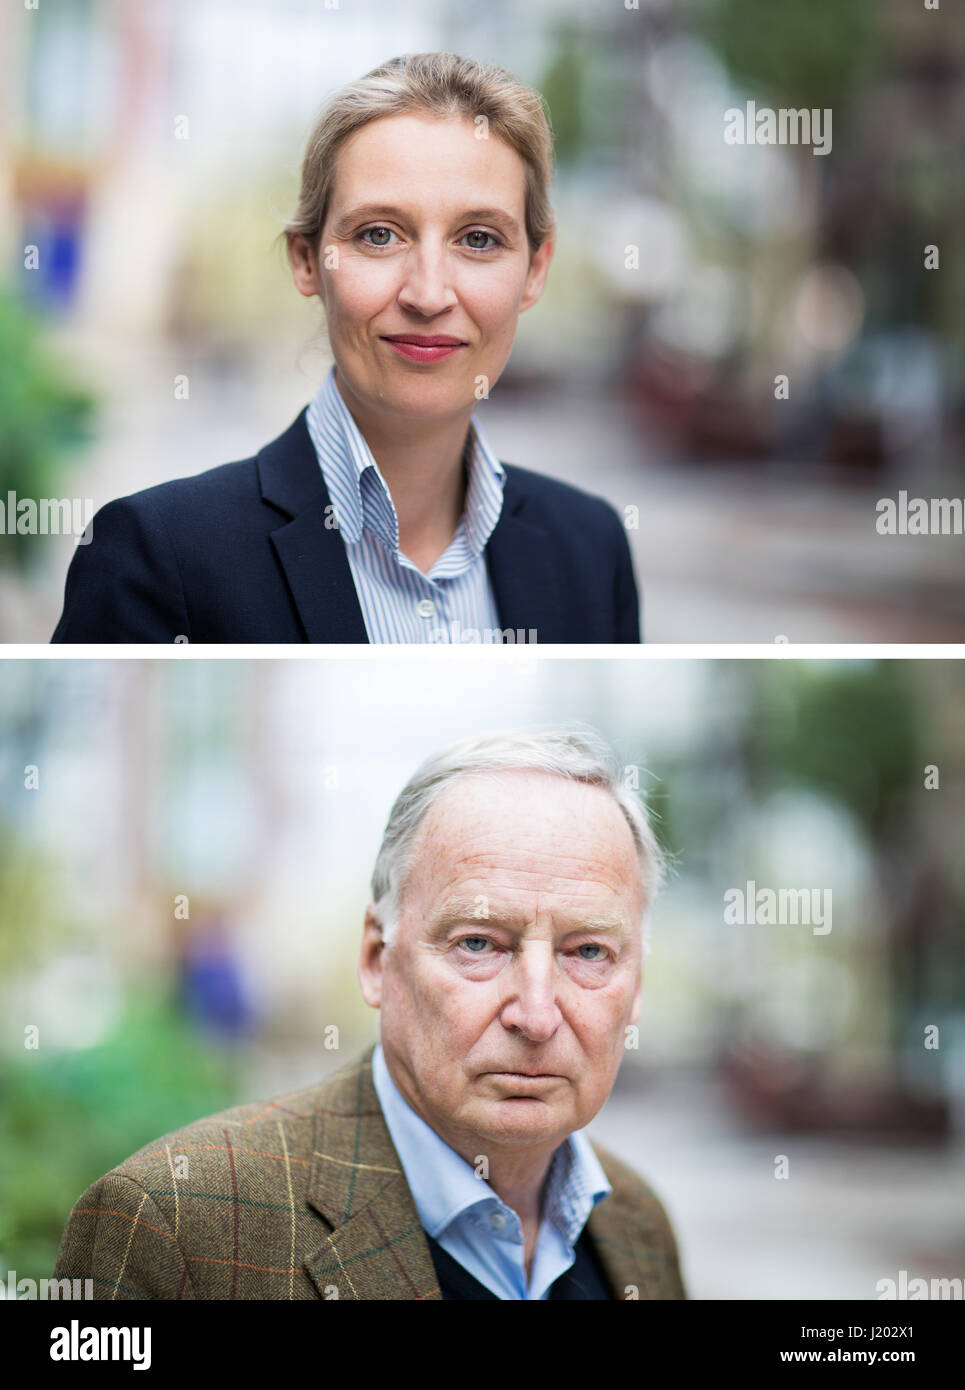 Cologne, Germany. 23rd Apr, 2017. COMBO - Alice Weidel (top) and Alexander Gauland, members of the AfD federal management board, photographed at the party's national convention in the Maritim Hotel in Cologne, Germany, 23 April 2017. The rightist-nationalist vice chairman of the party Alexander Gauland and the liberal Alice Weidel will lead the AfD party into the national elections. Photo: Rolf Vennenbernd/dpa/Alamy Live News Stock Photo